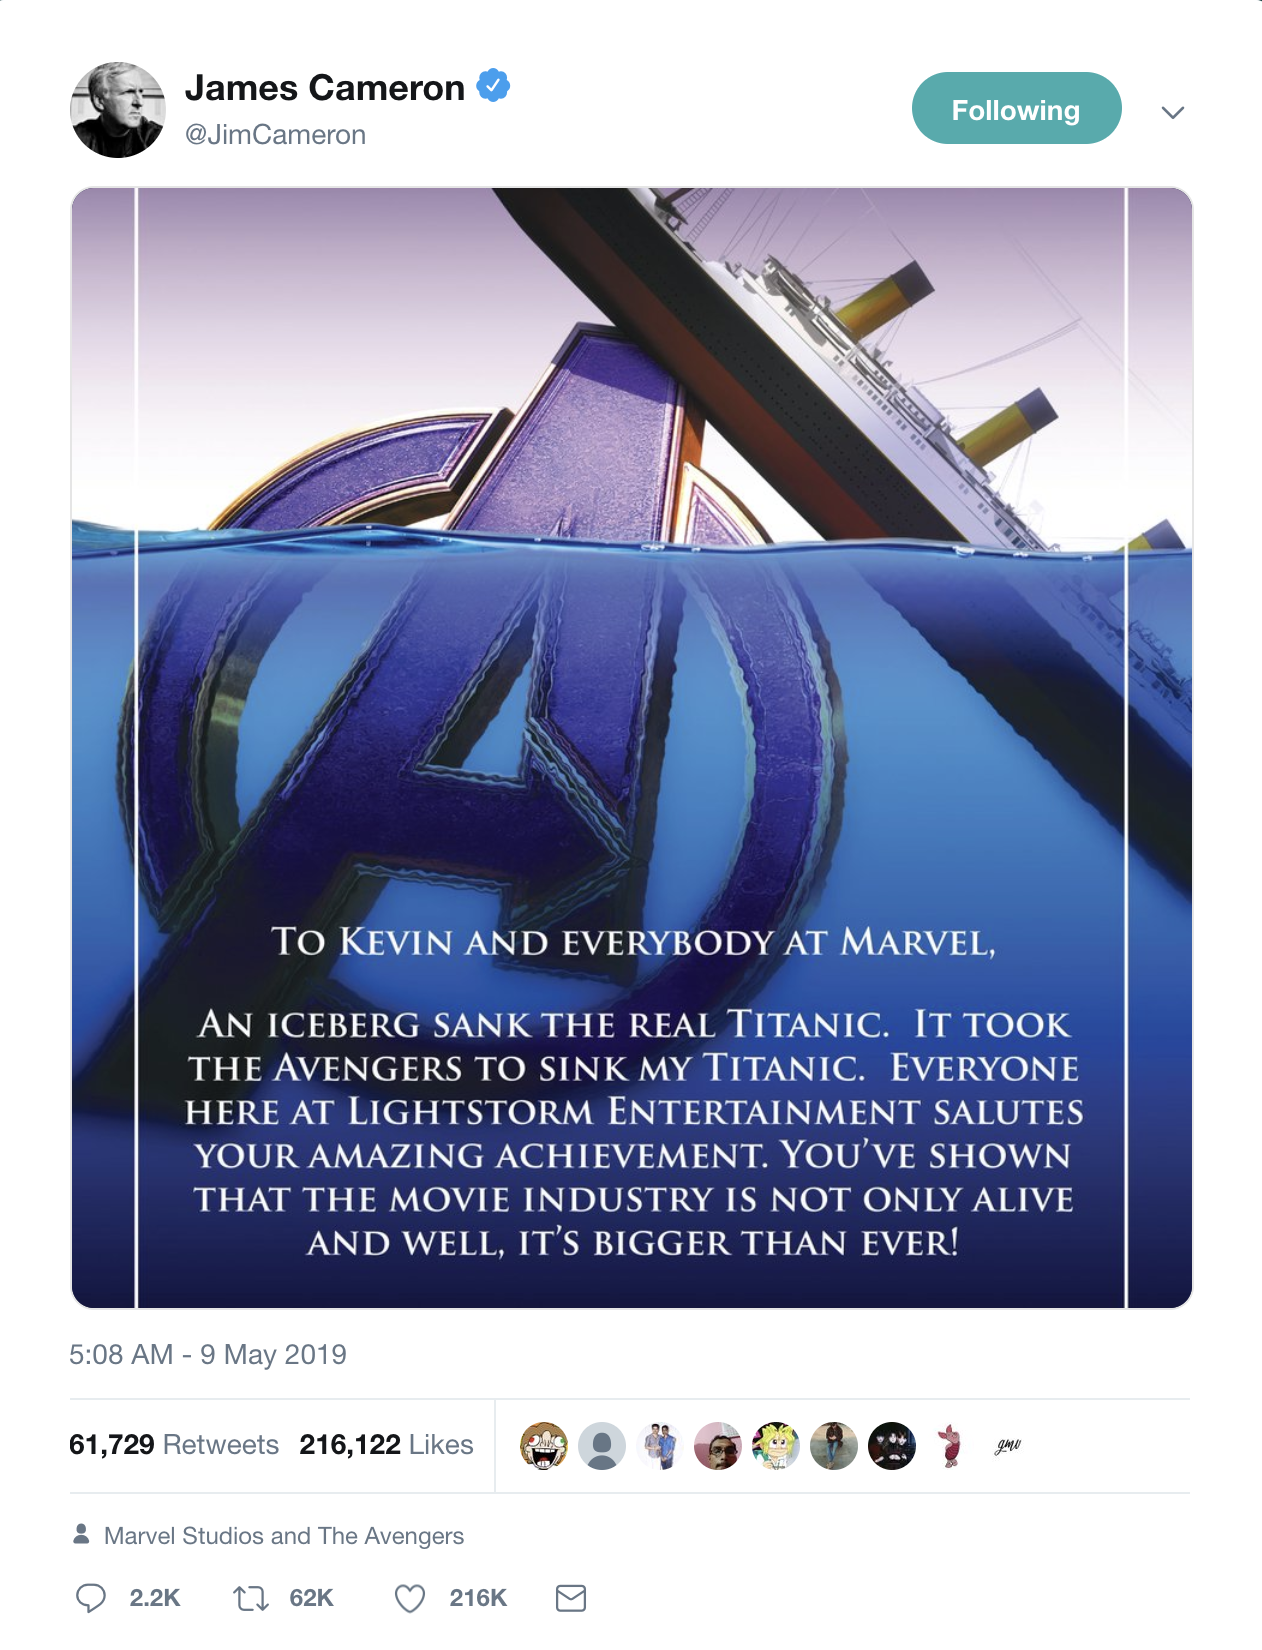 Titanic director James Cameron tweets congratulations to Avengers: Endgame directors the Russo brothers